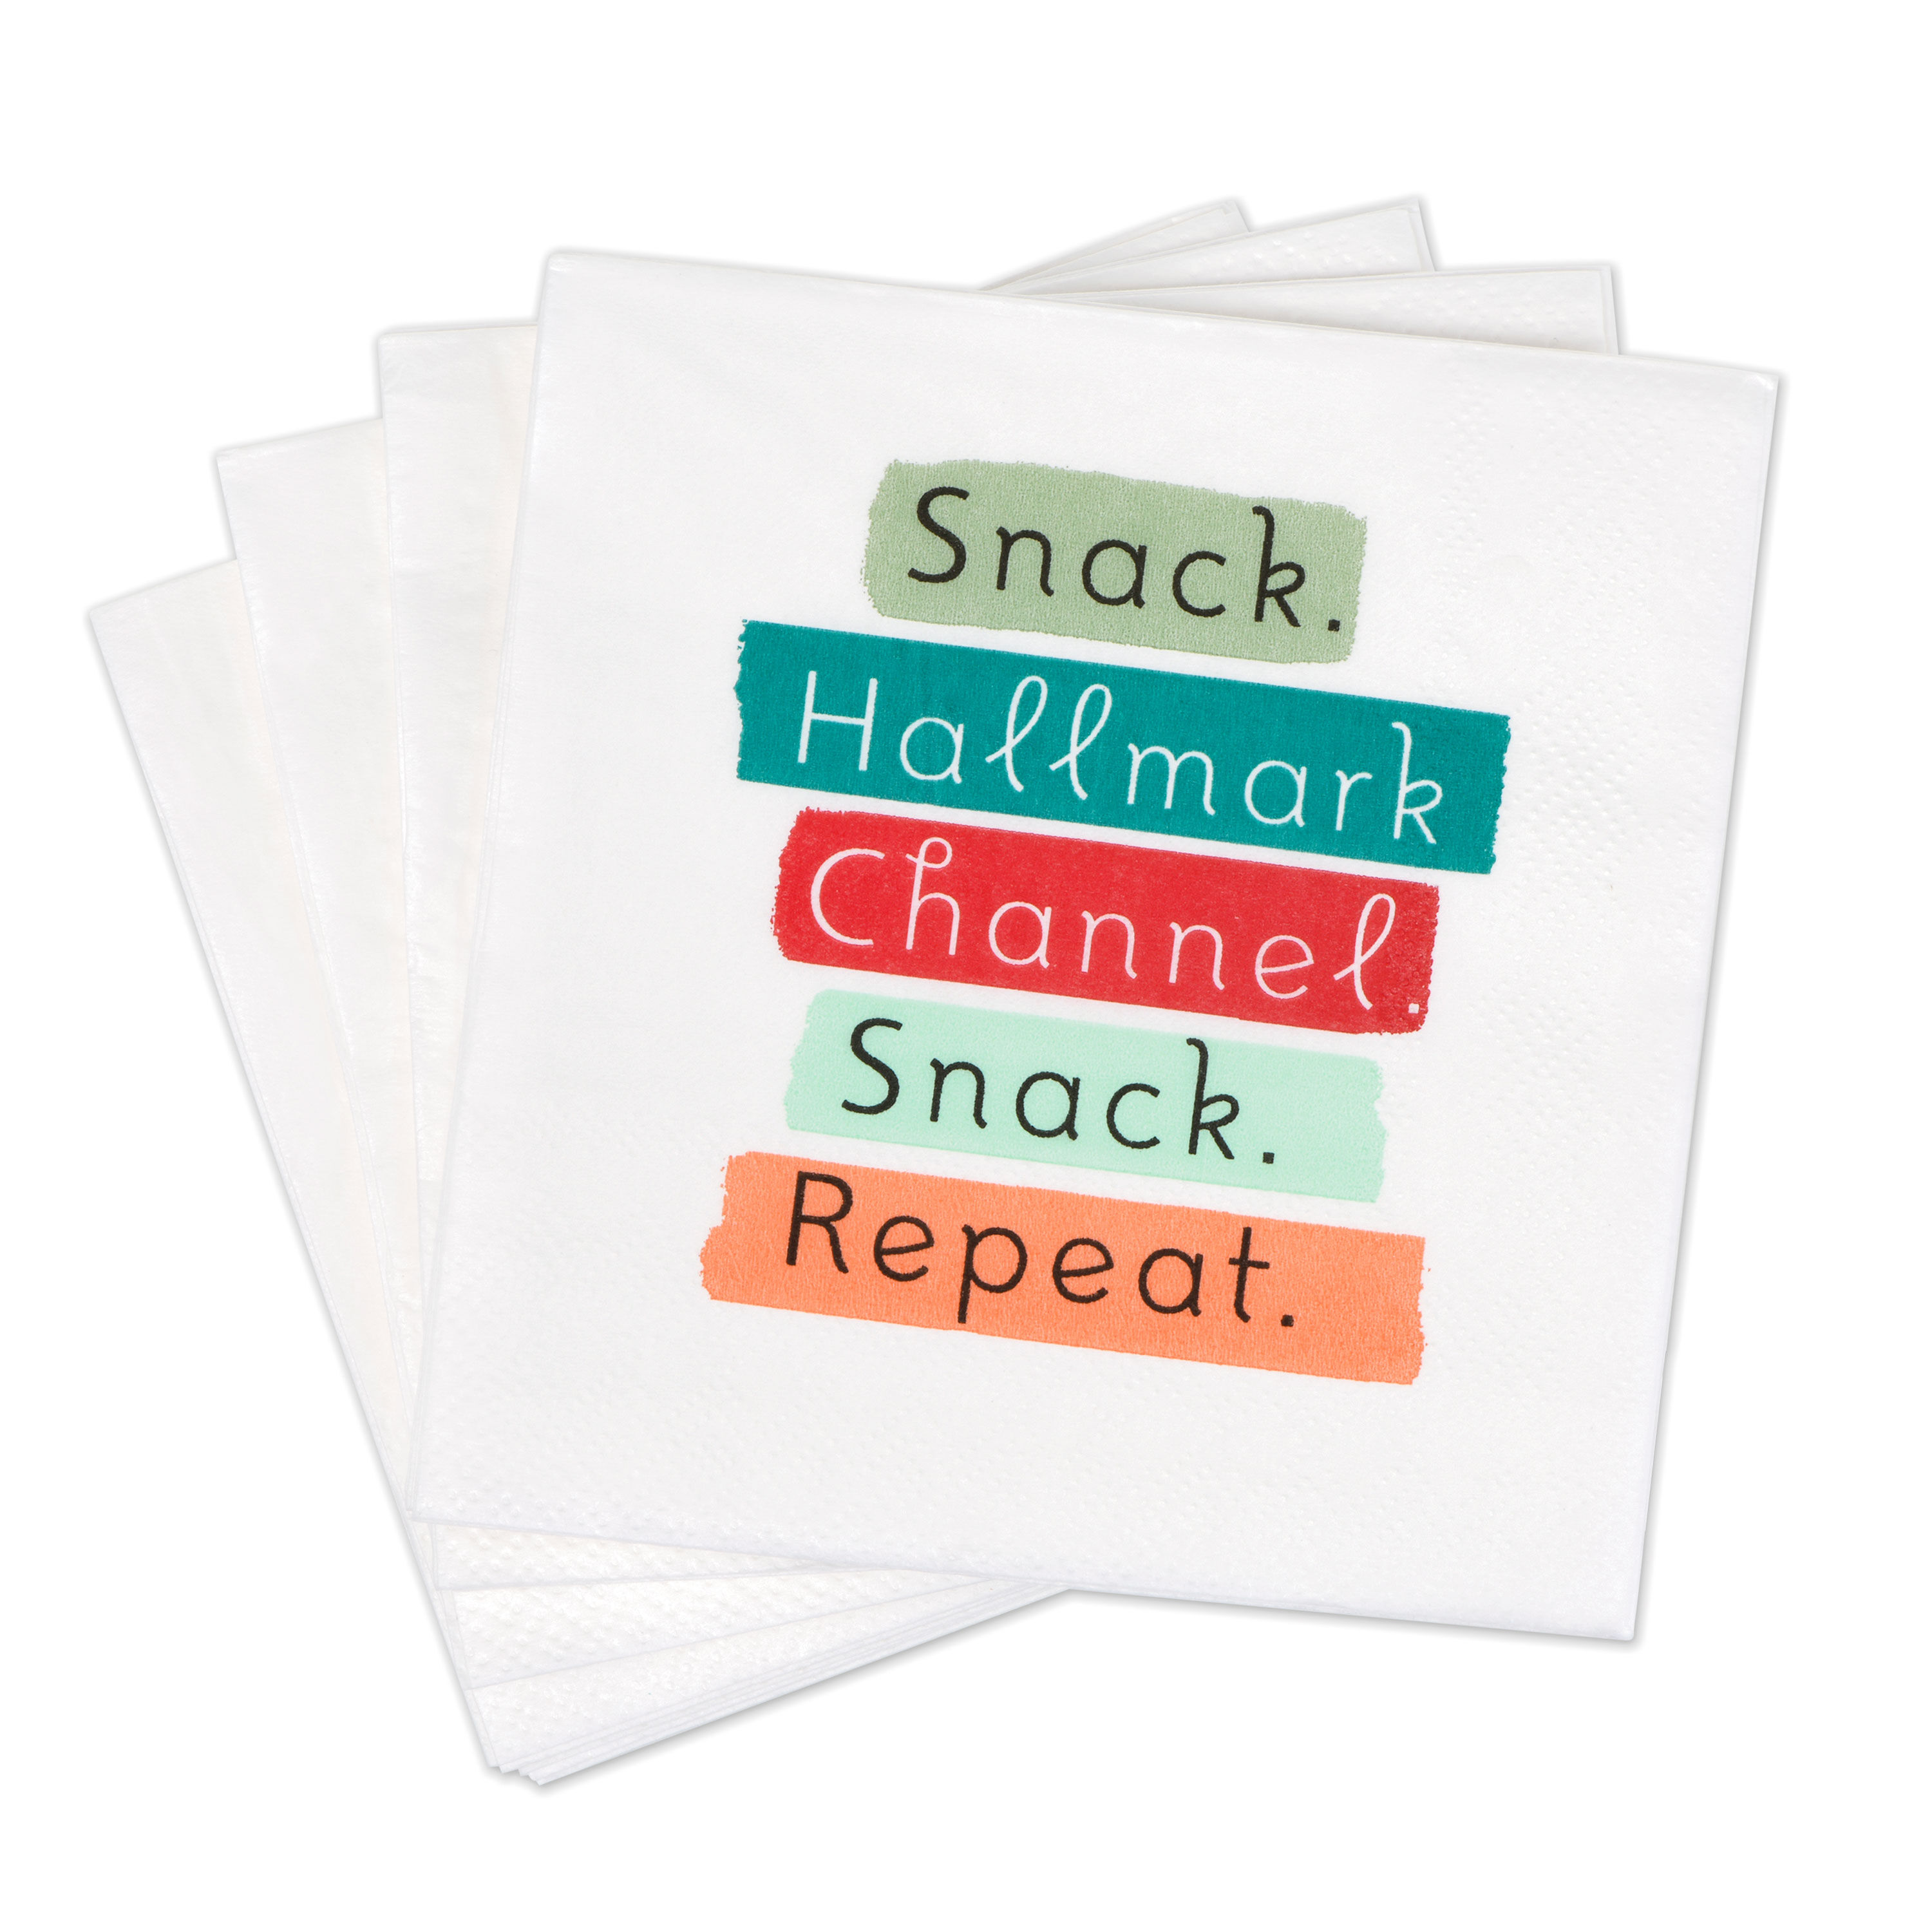 Hallmark Channel Snack Repeat Cocktail Napkins, Pack of 20 - Party  Tableware - Hallmark